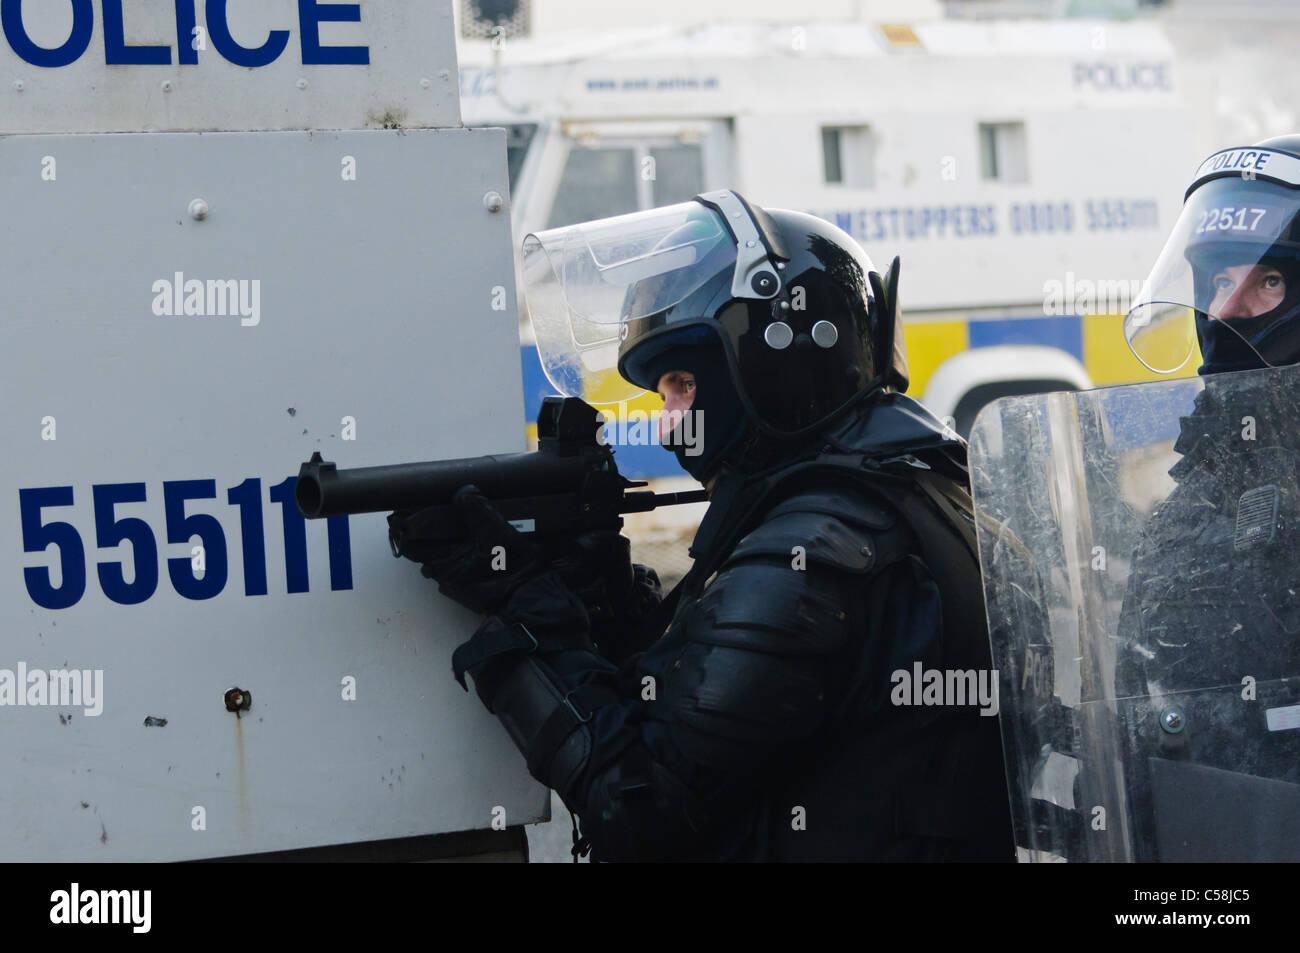 Police officer aims a Heckler and Koch L104A1 37mm single-shot AEP launcher at rioters Stock Photo